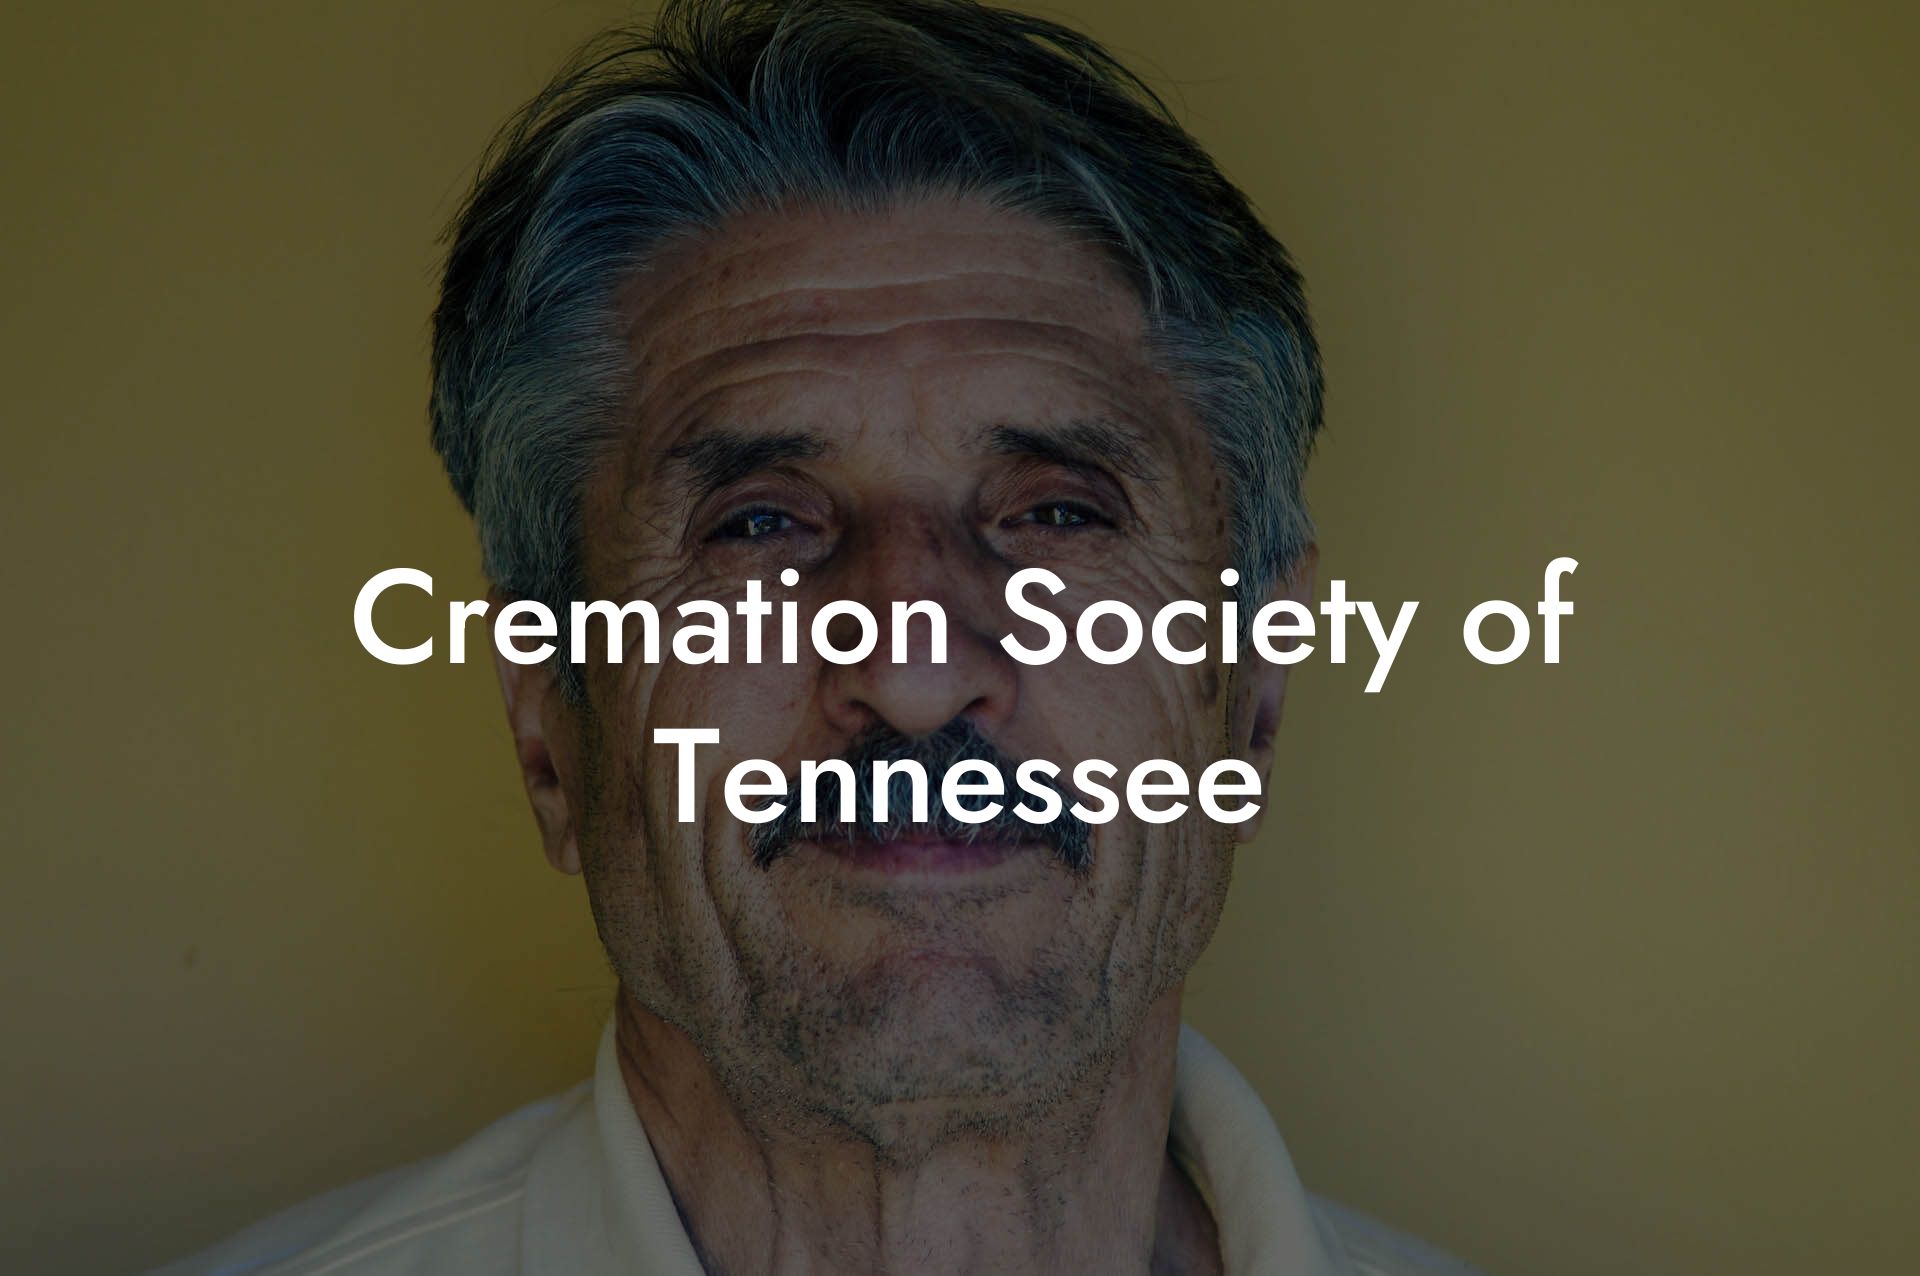 Cremation Society of Tennessee